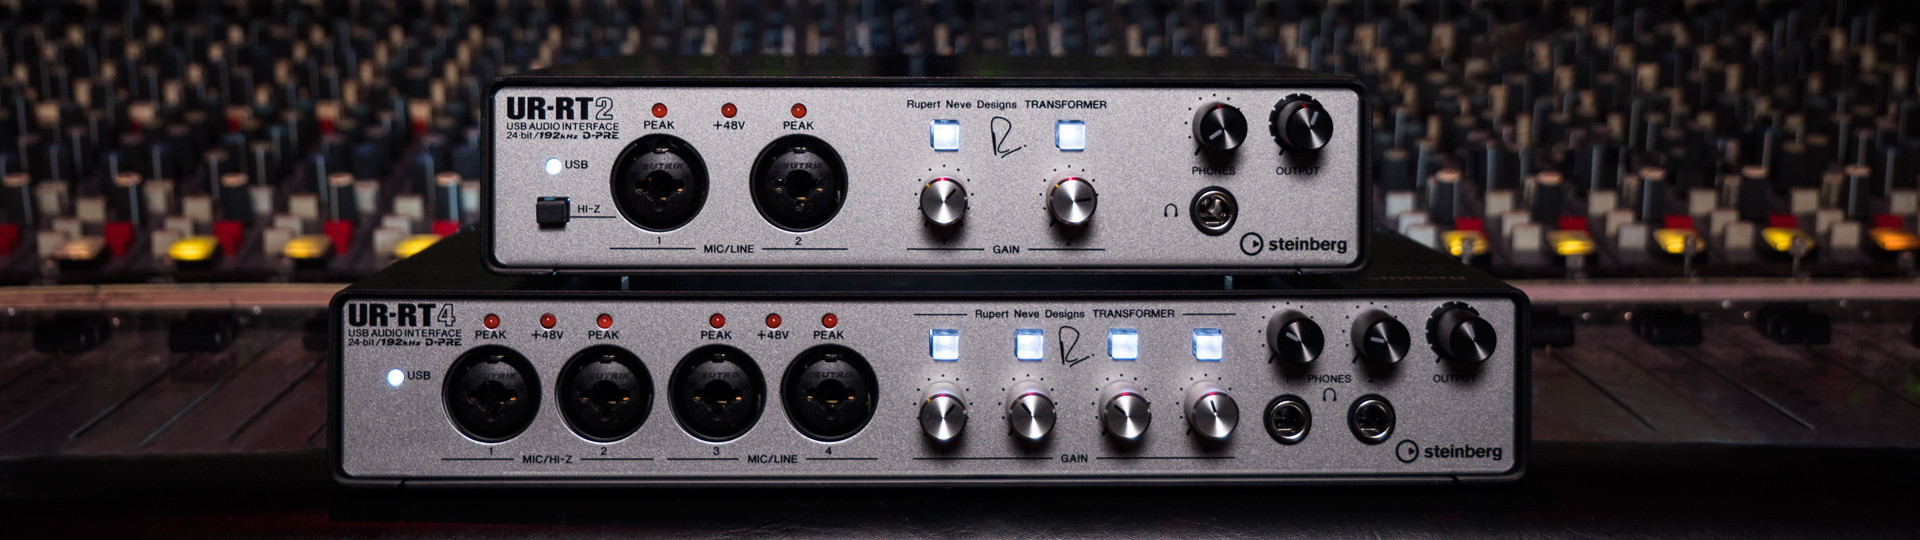 Steinberg announce two new audio interfaces: the UR-RT2 and the UR-RT4